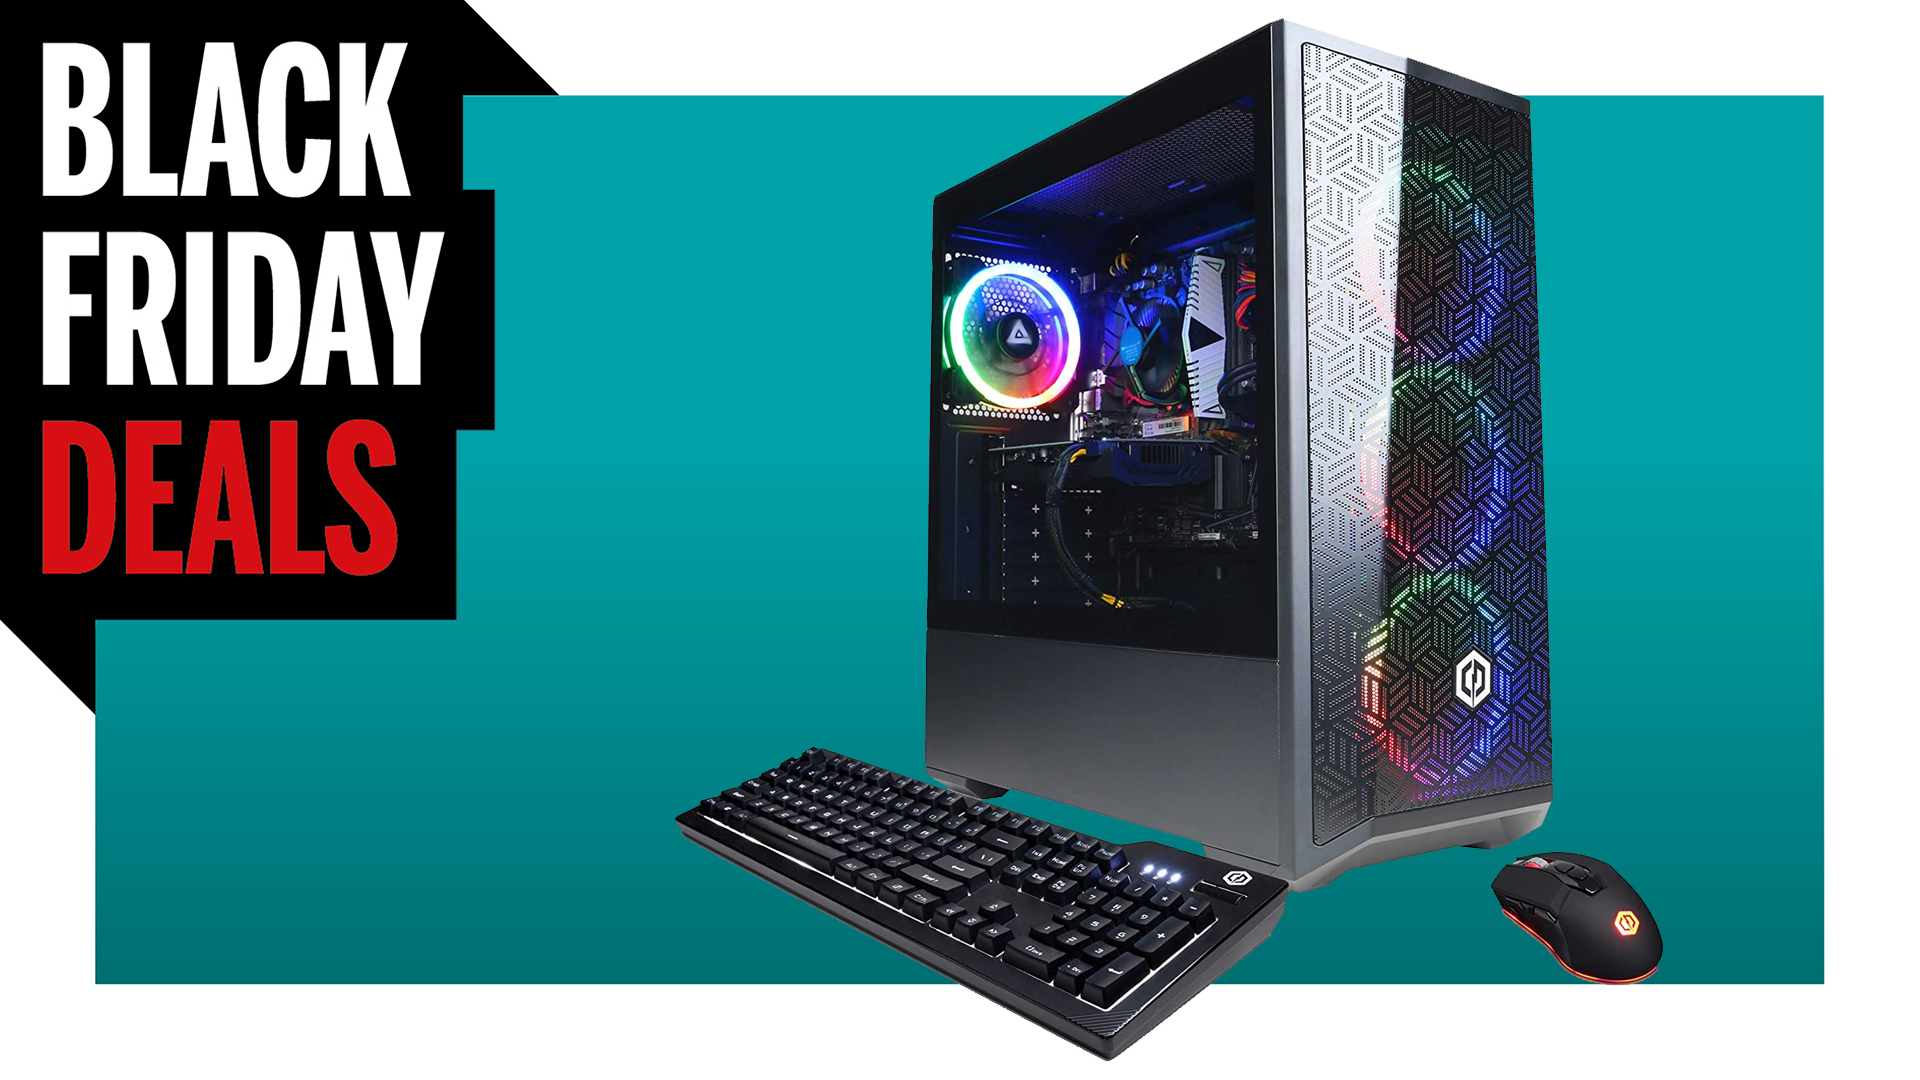  This RTX 2060 Black Friday gaming PC deal  makes getting a starter ray-tracing rig that little bit cheaper 